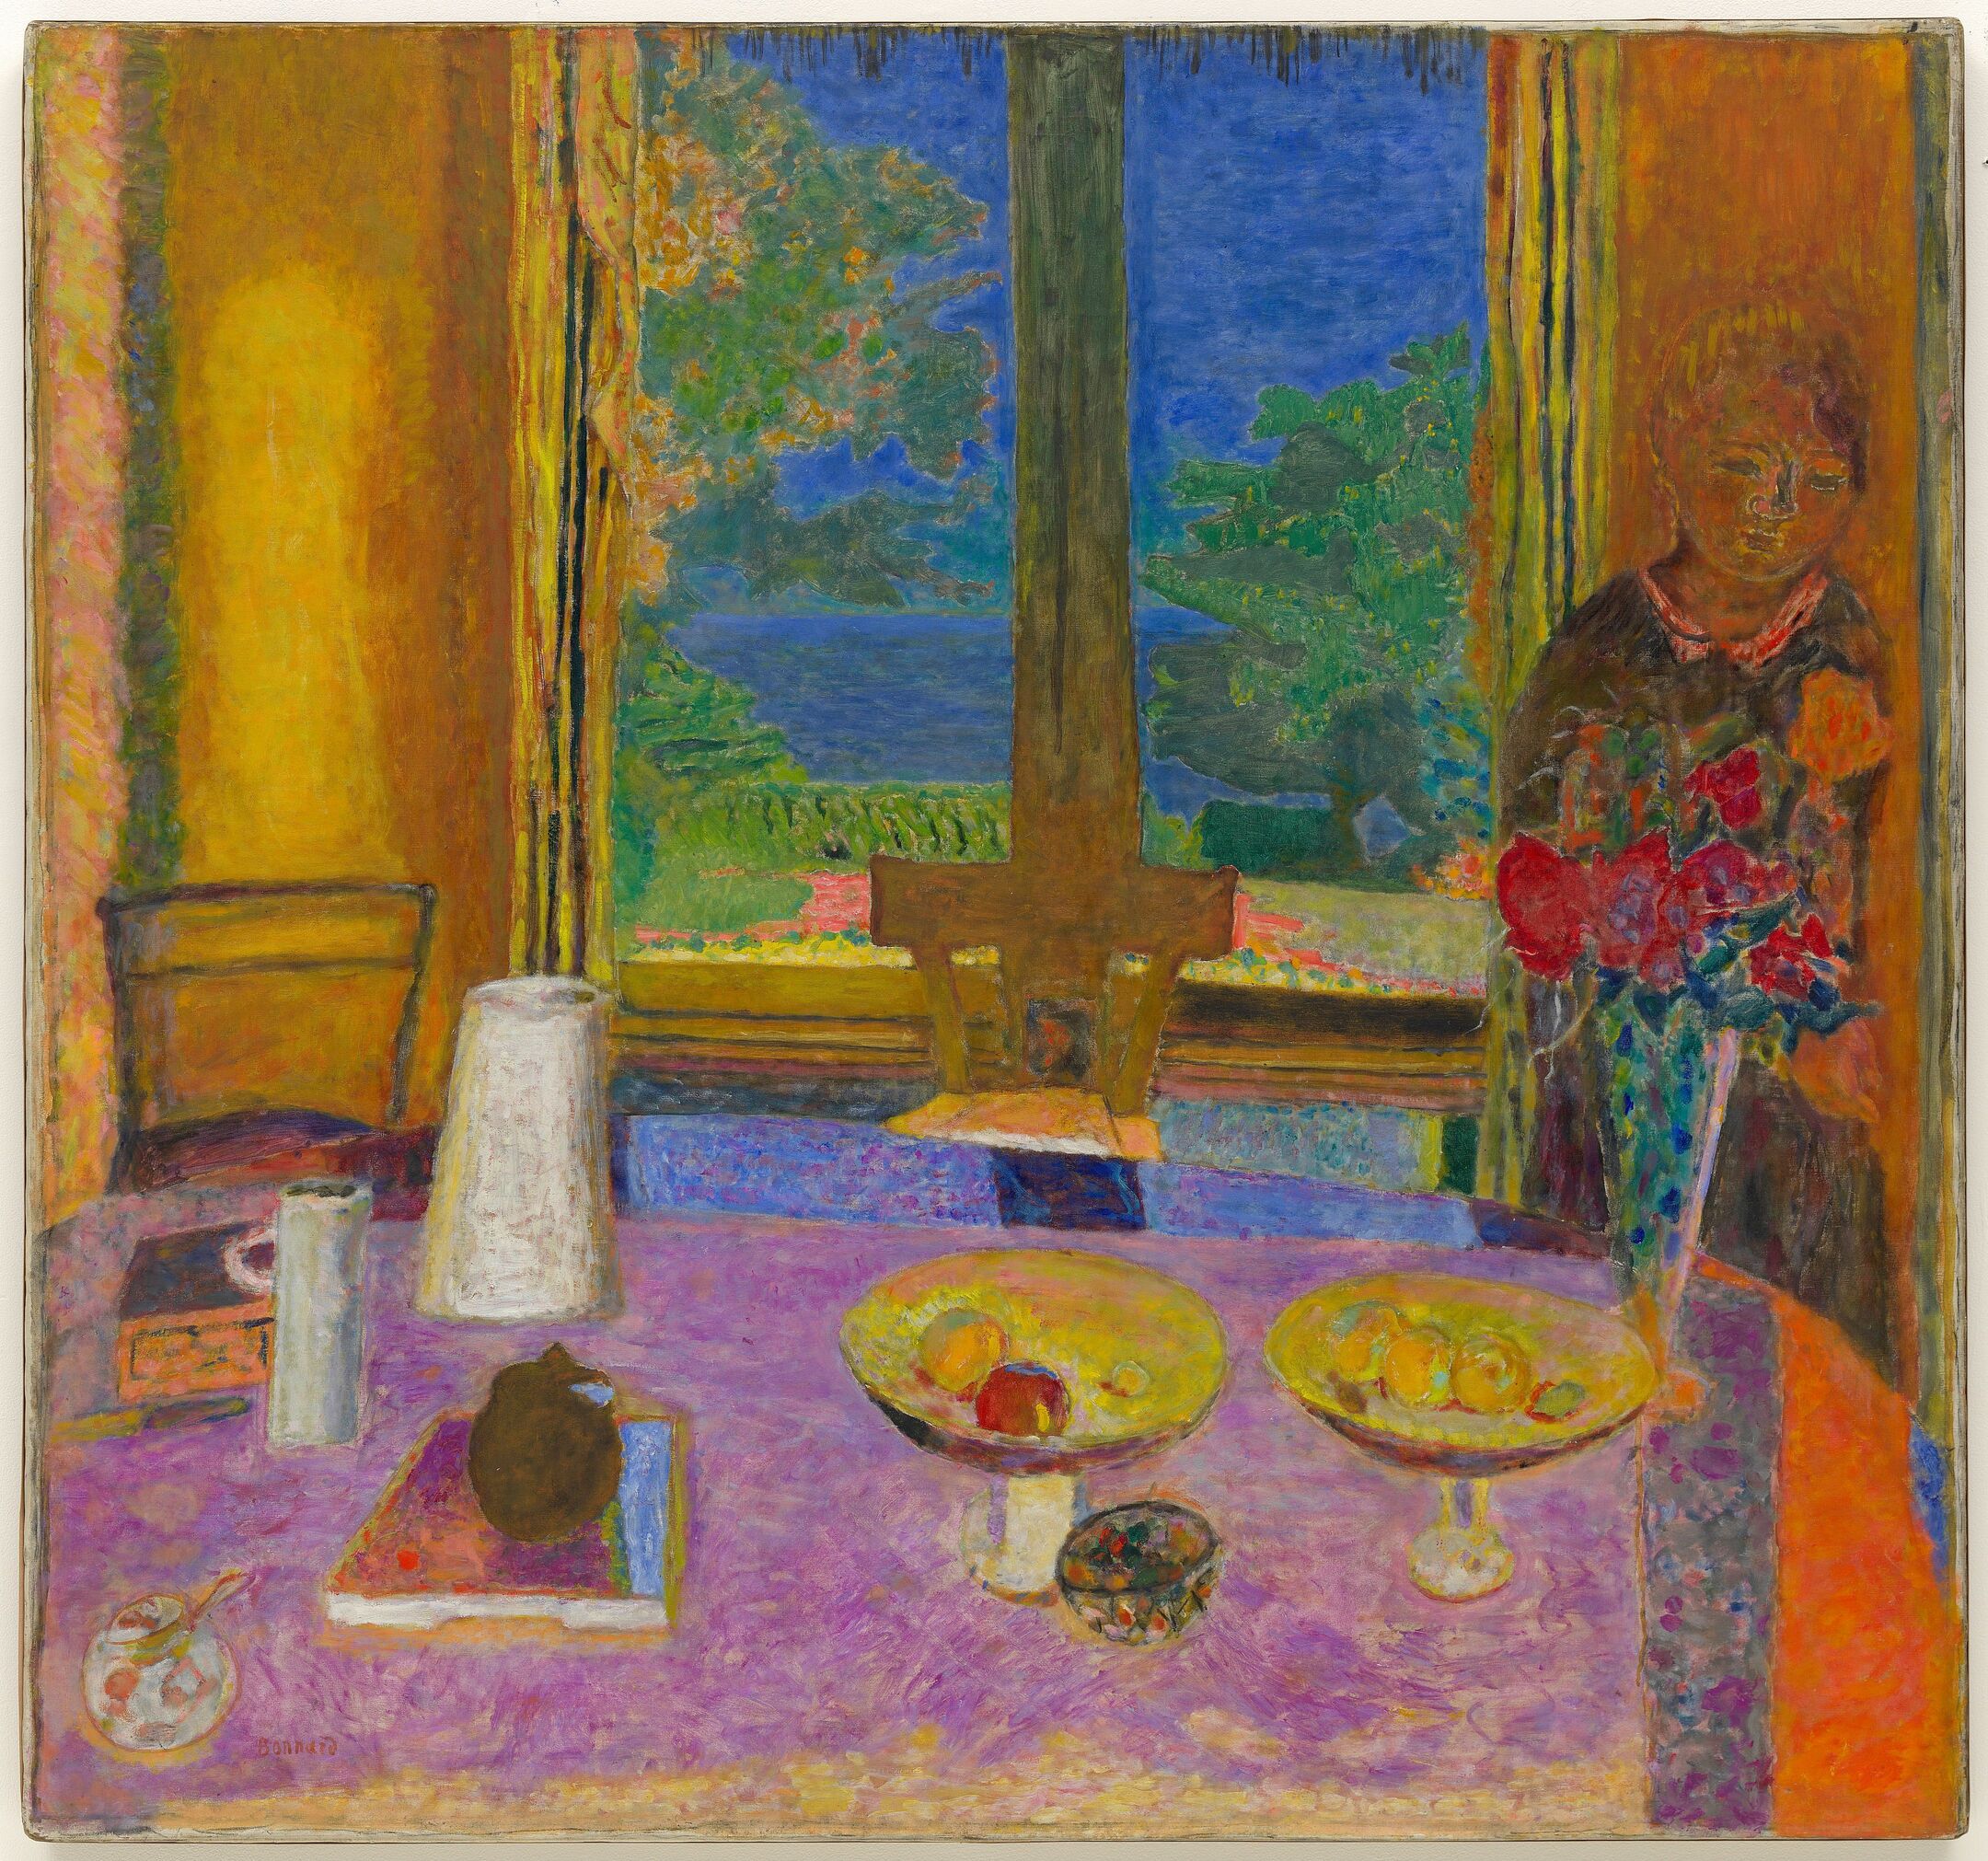 Pierre Bonnard, Dining Room on the Garden, 1935, Oil on canvas, 50 x 53 1/4 in.